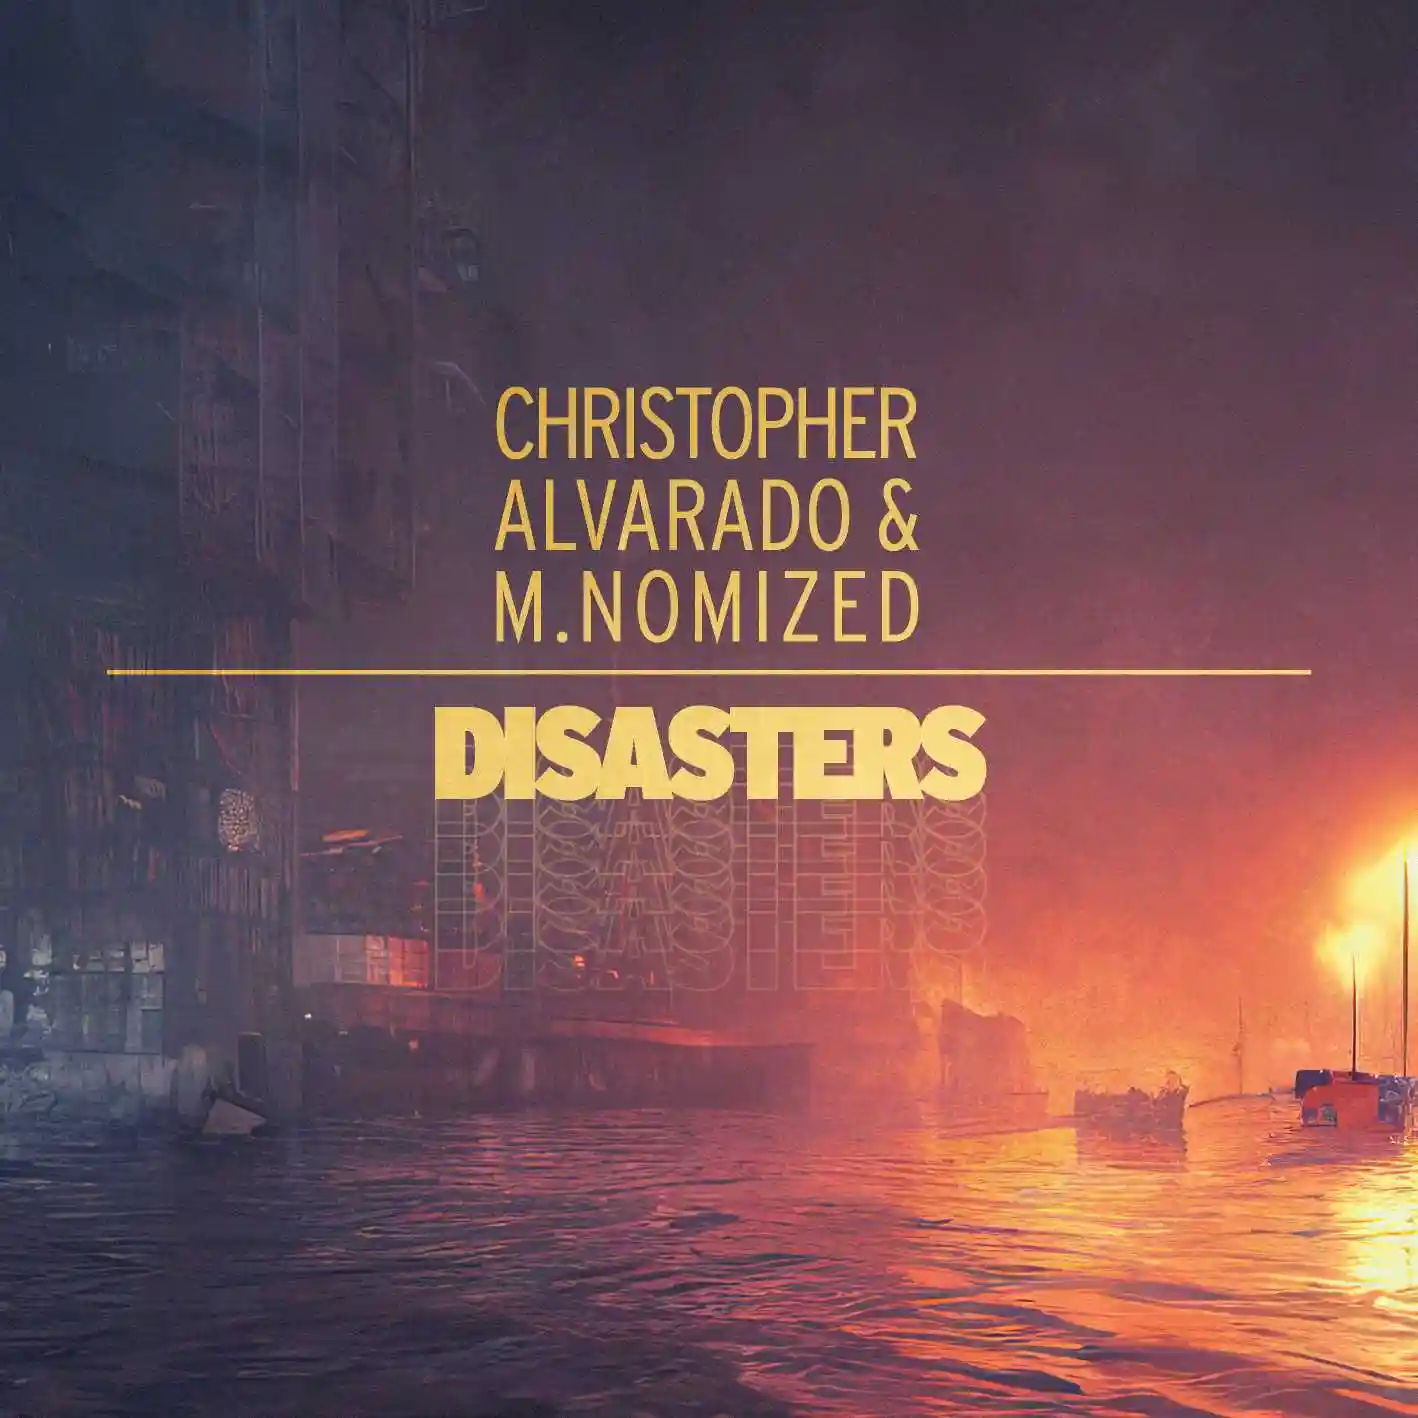 Album cover for “Disasters” by Christopher Alvarado &amp; M.Nomized